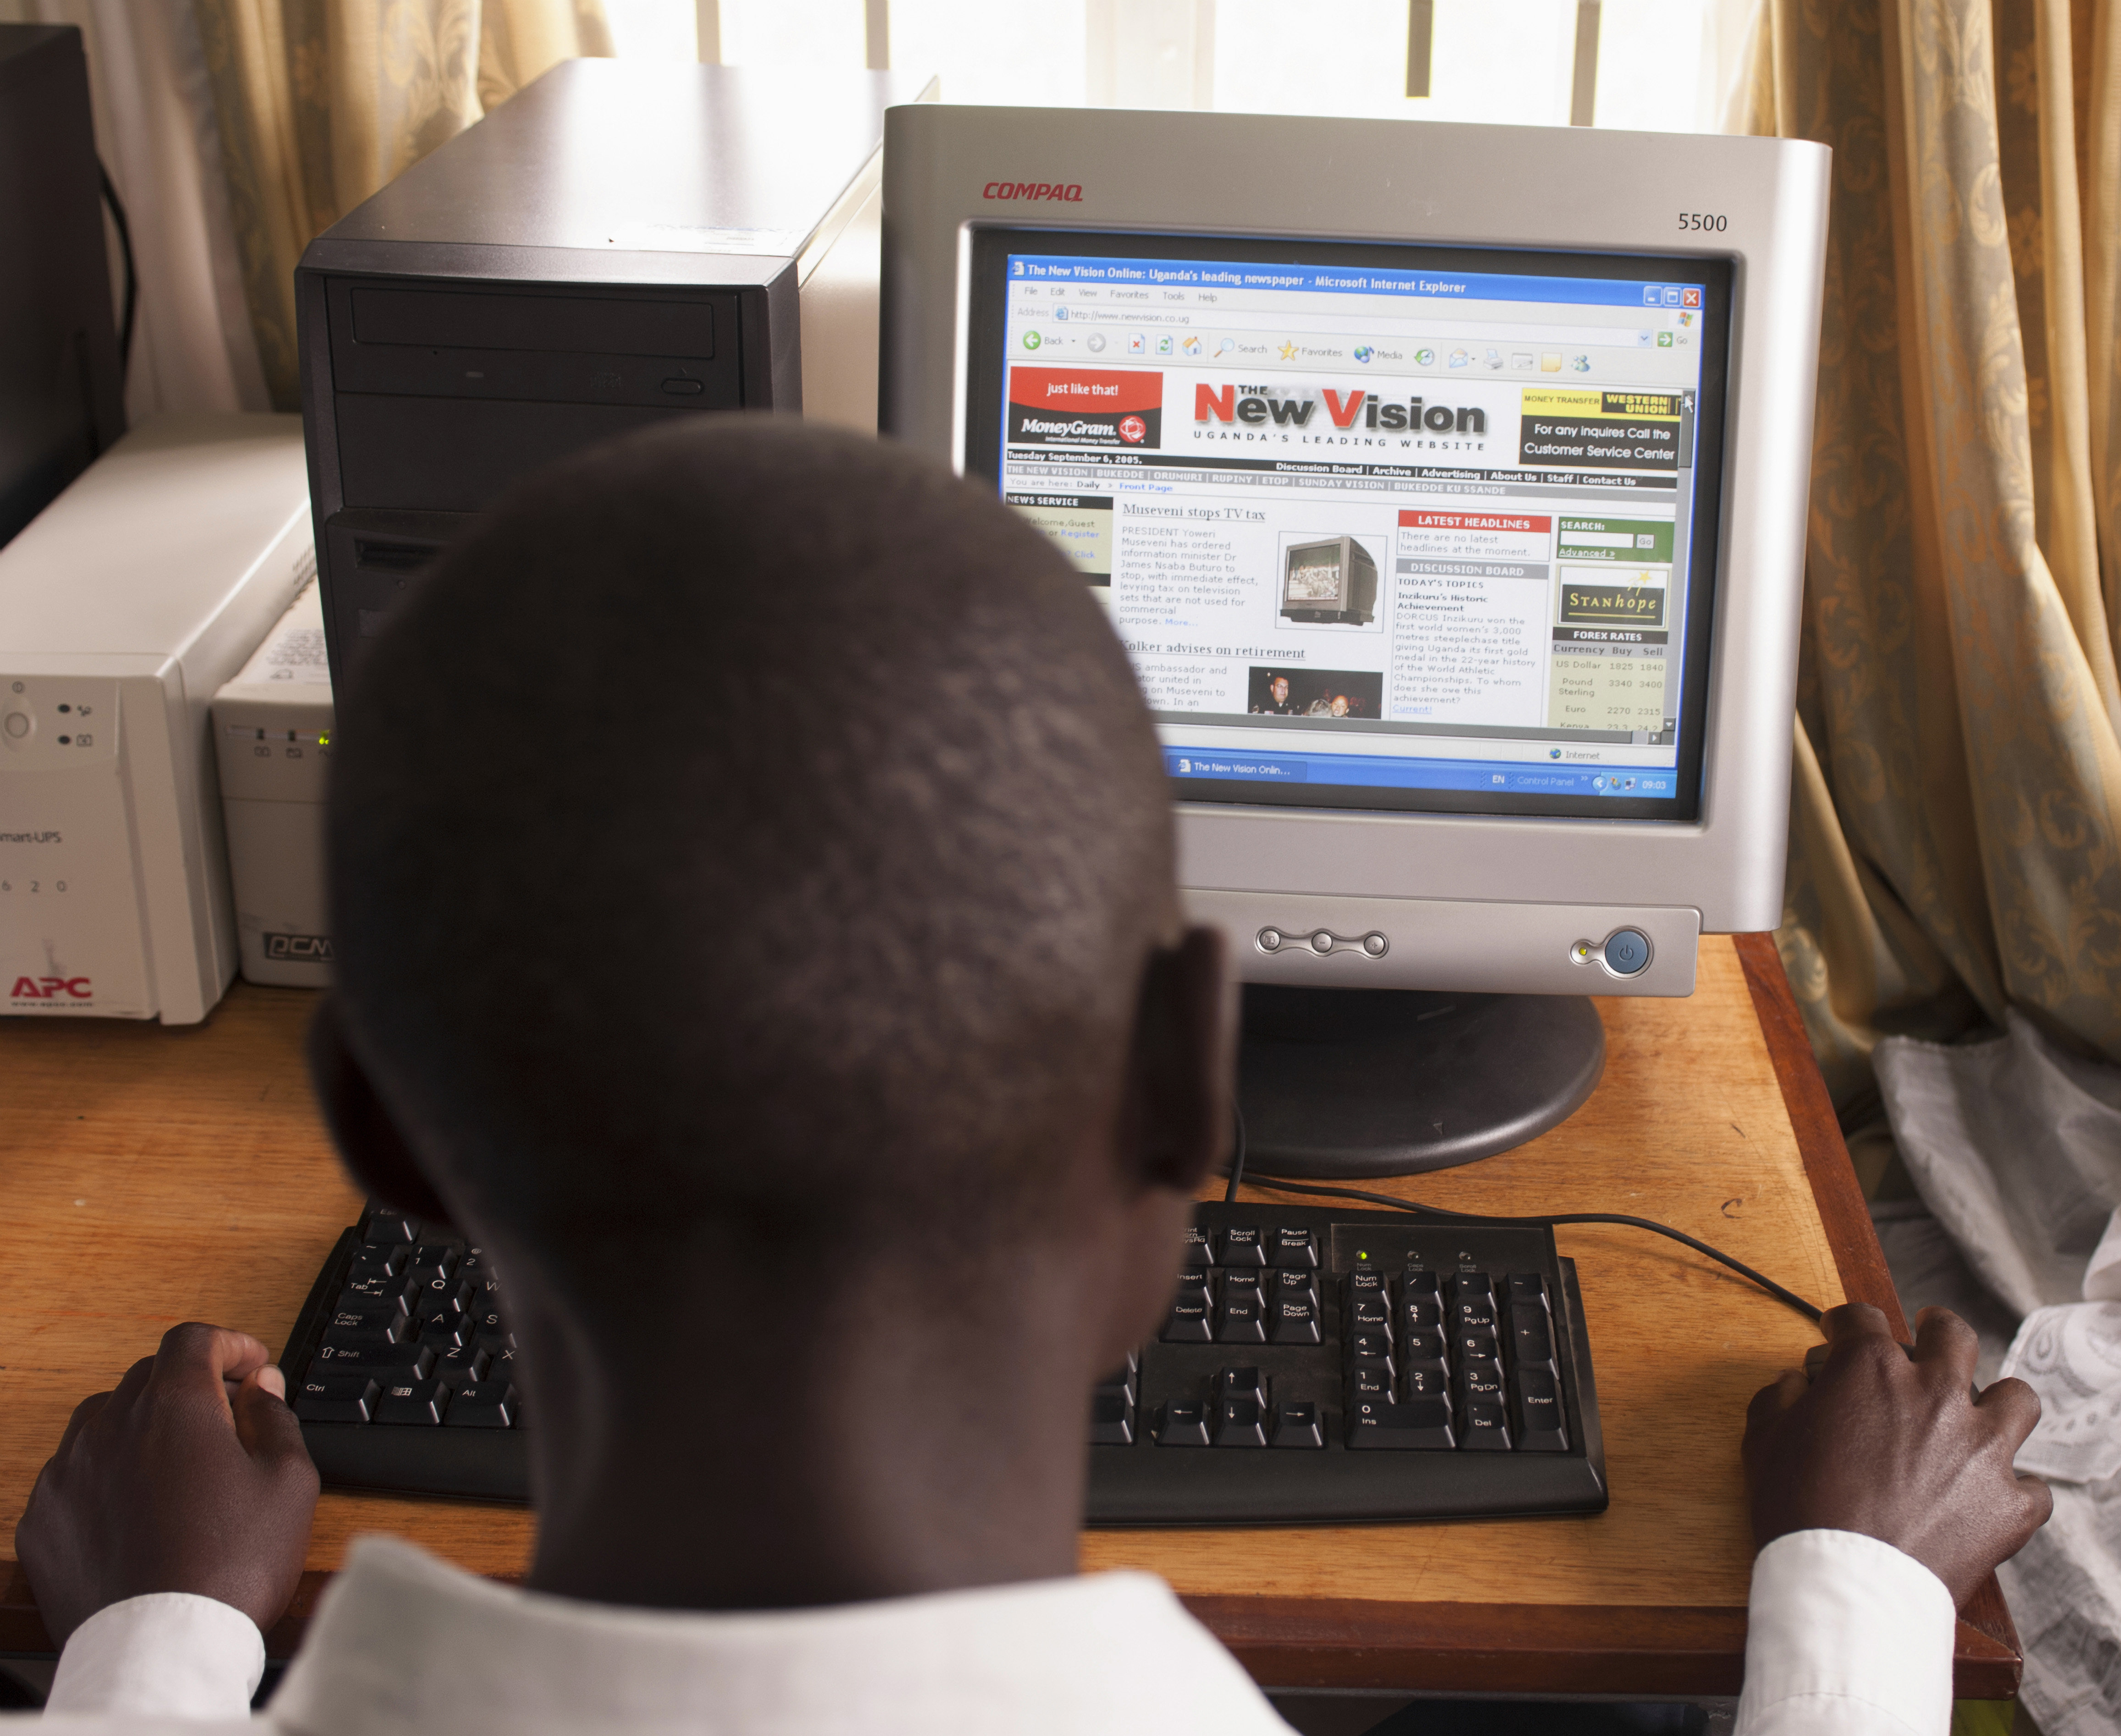 Uganda Buys A Pornography Detection Machine To Catch Offenders, Official Says HuffPost The WorldPost picture